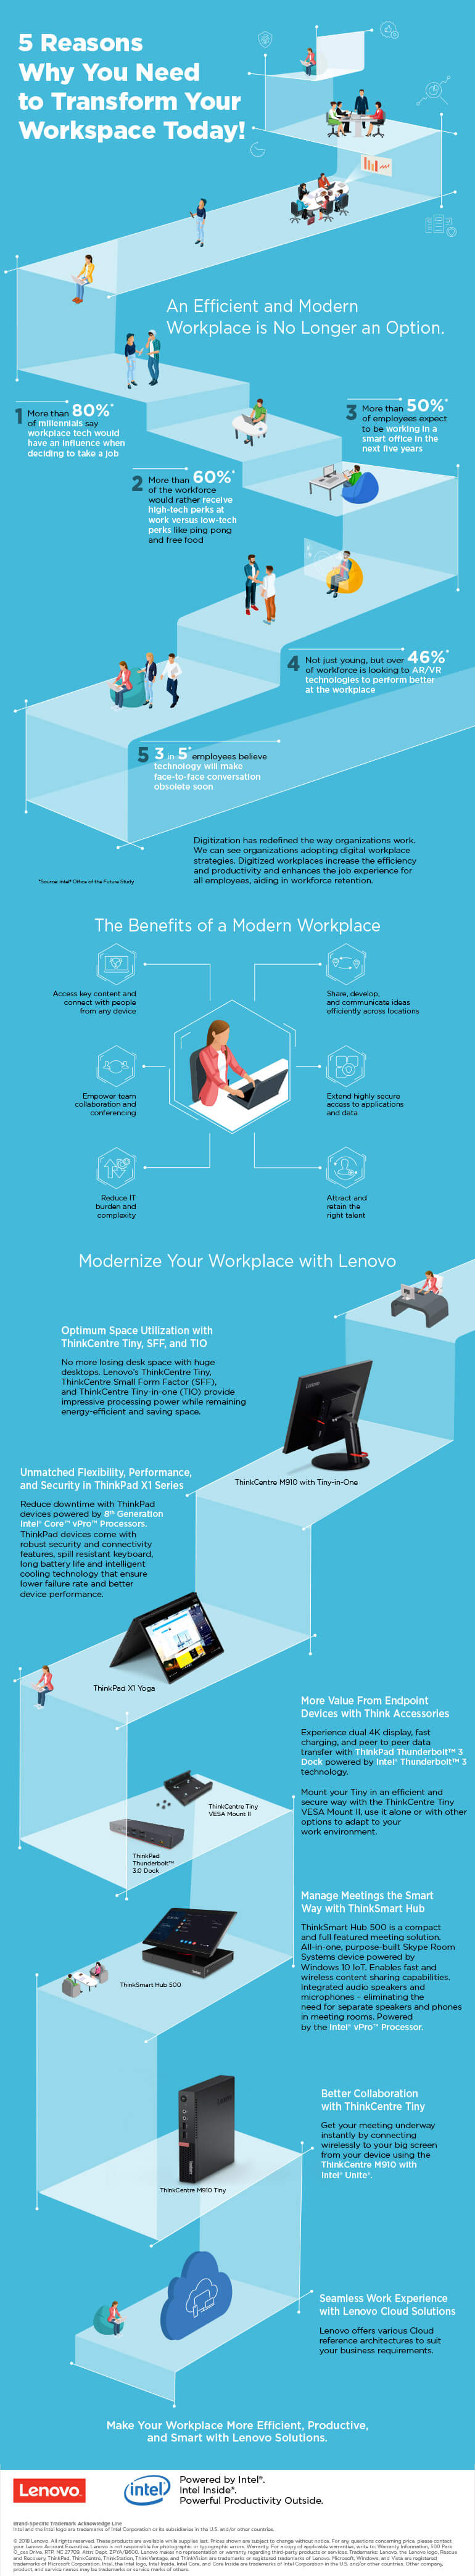 Infographic displaying the 5 Reasons Why You Need to Transform Your Workspace Today as described below